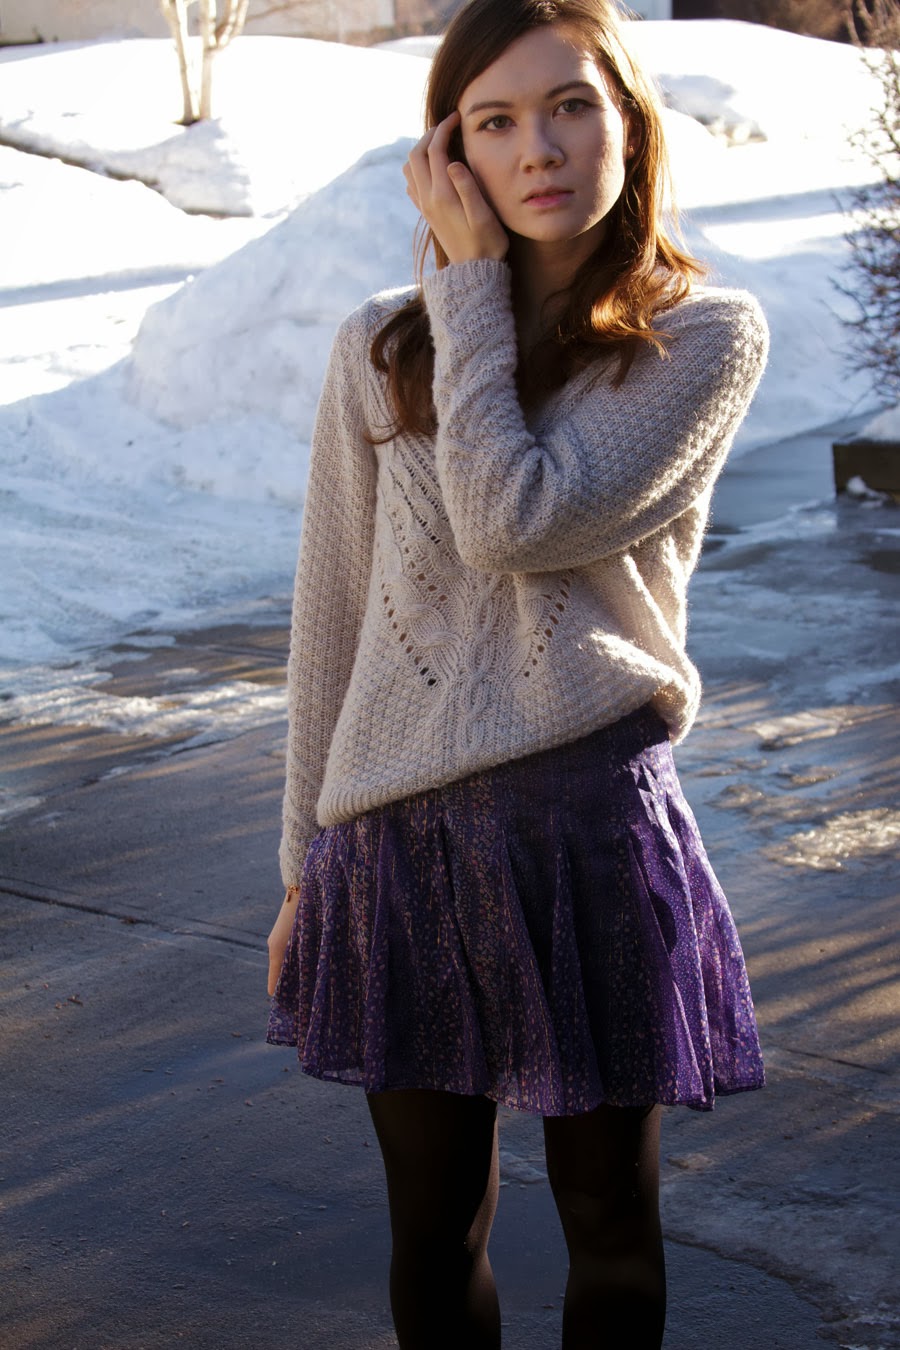 Winter Skirt, winter fashion, spring fashion, boots, american eagle, h&m, marc jacobs, michael kors watch